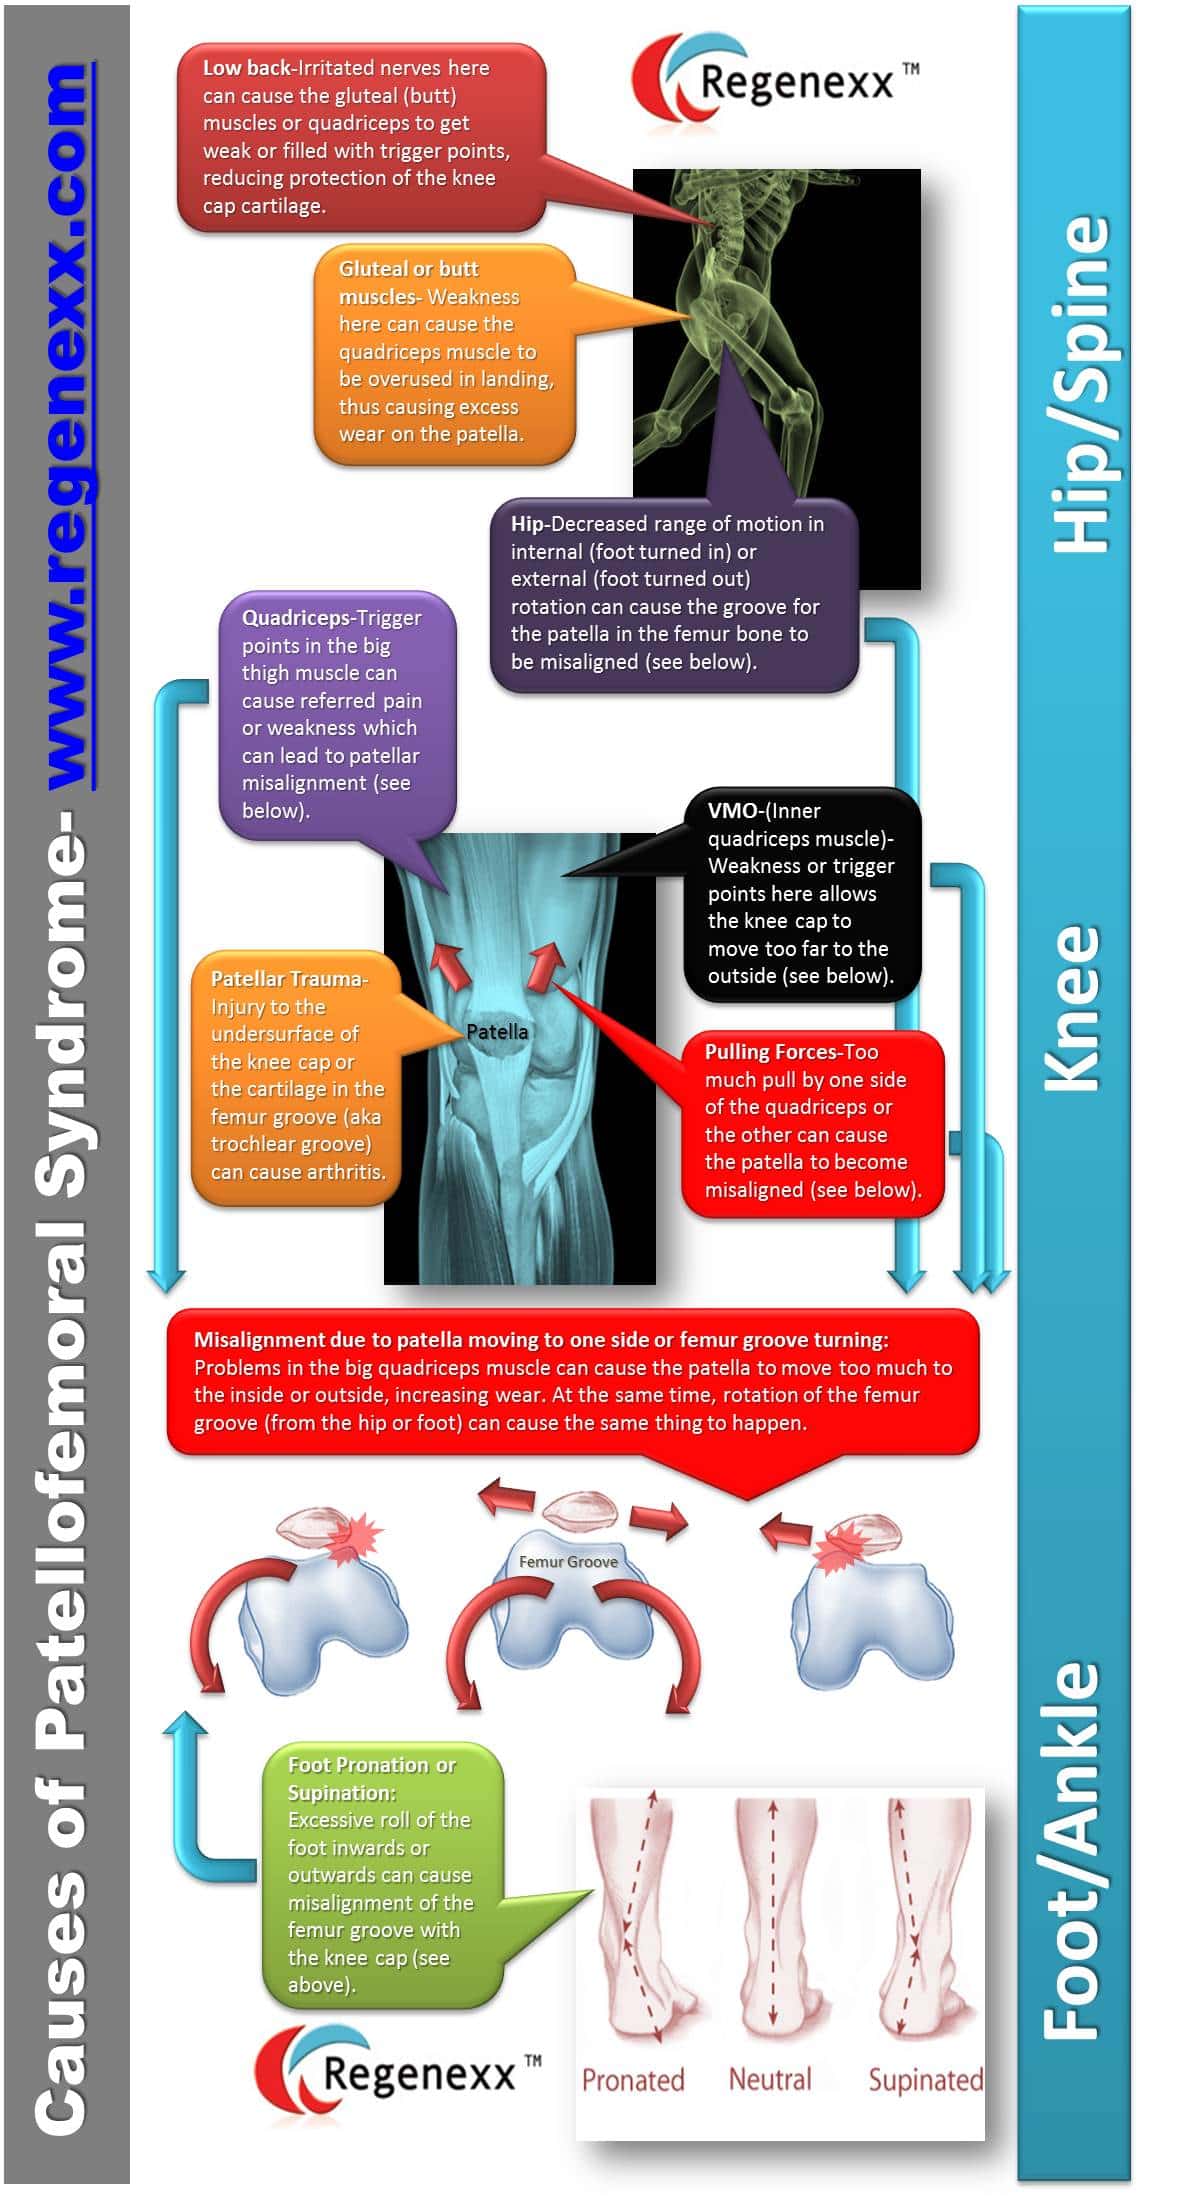 patellofemoral pain syndrome infographic